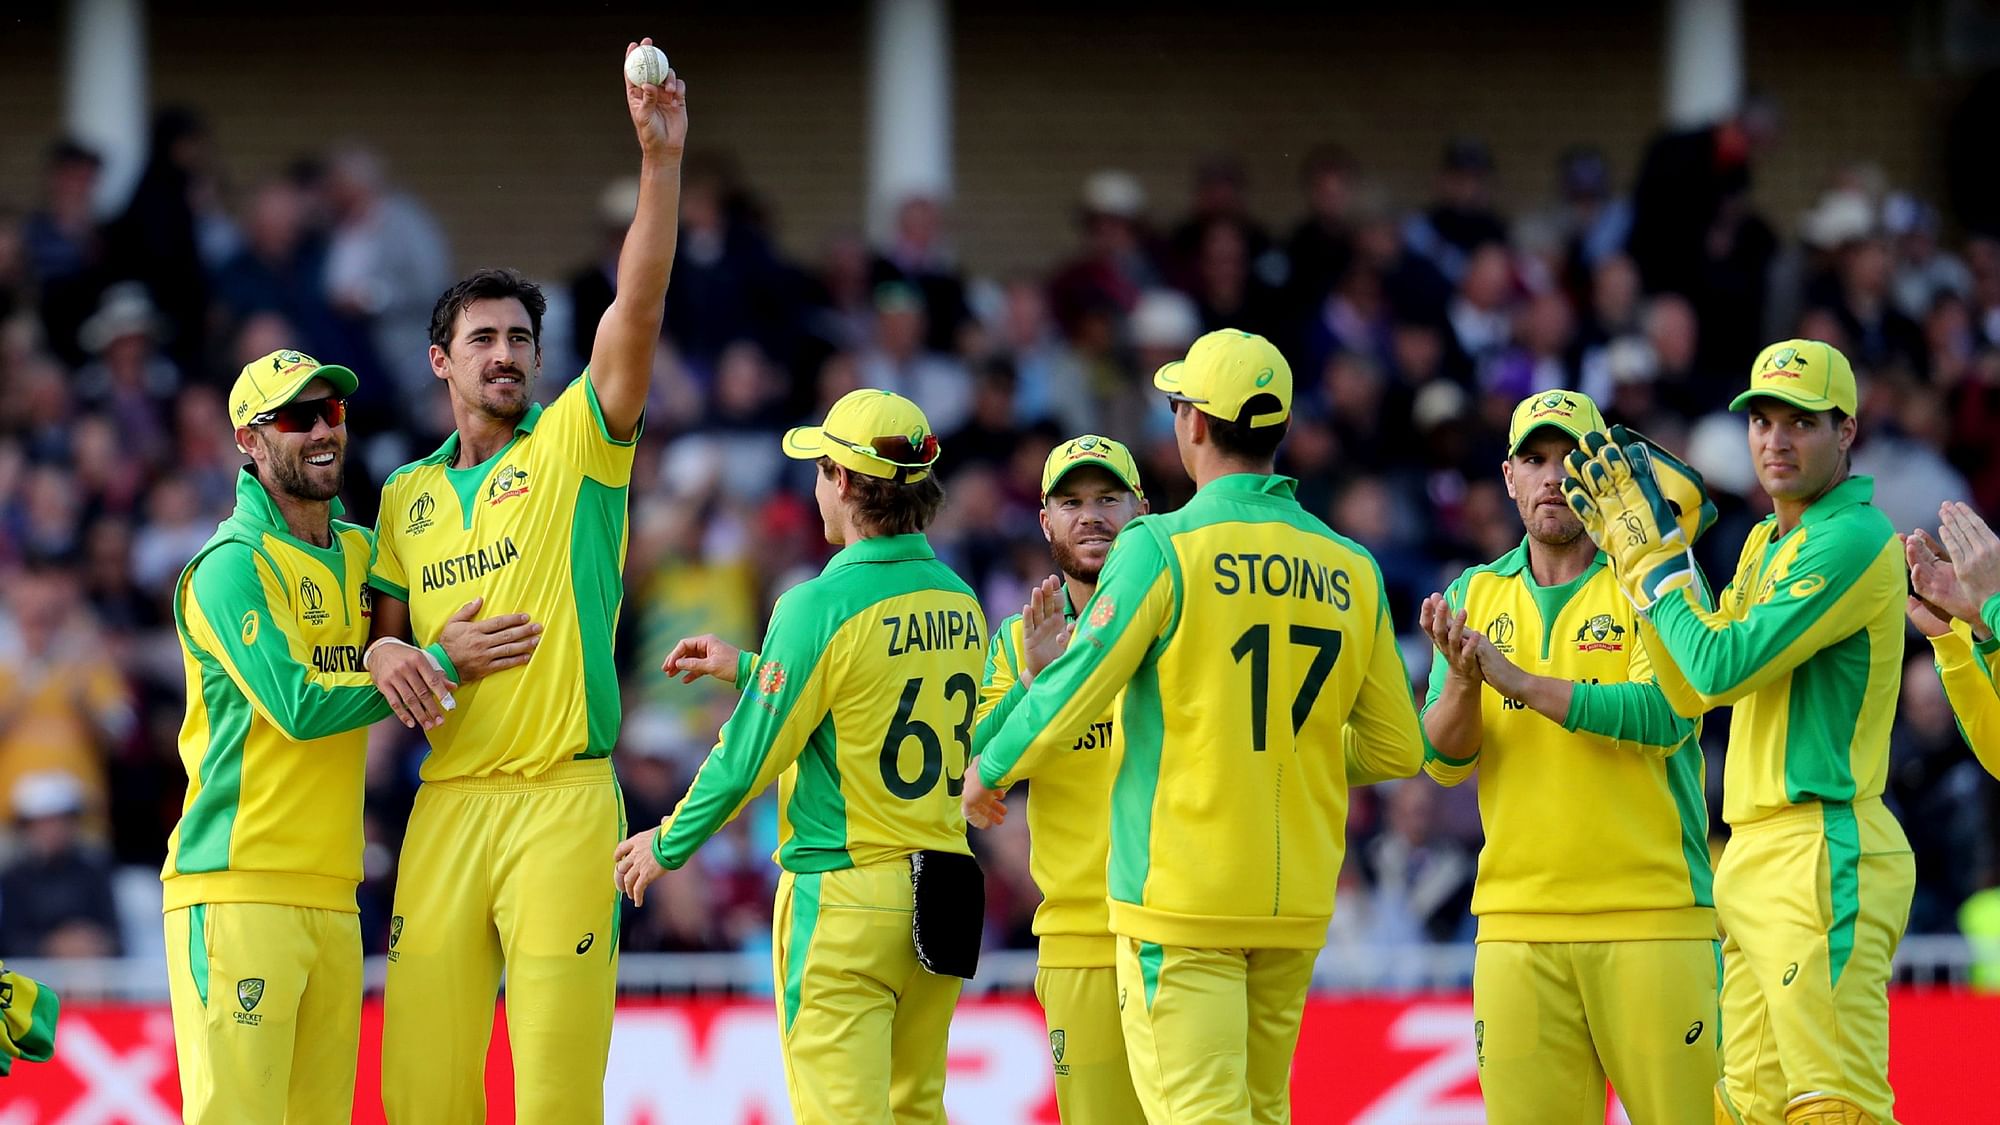 Mitchell Starc became the first bowler to take a five-wicket haul in the ongoing World Cup in England and Wales